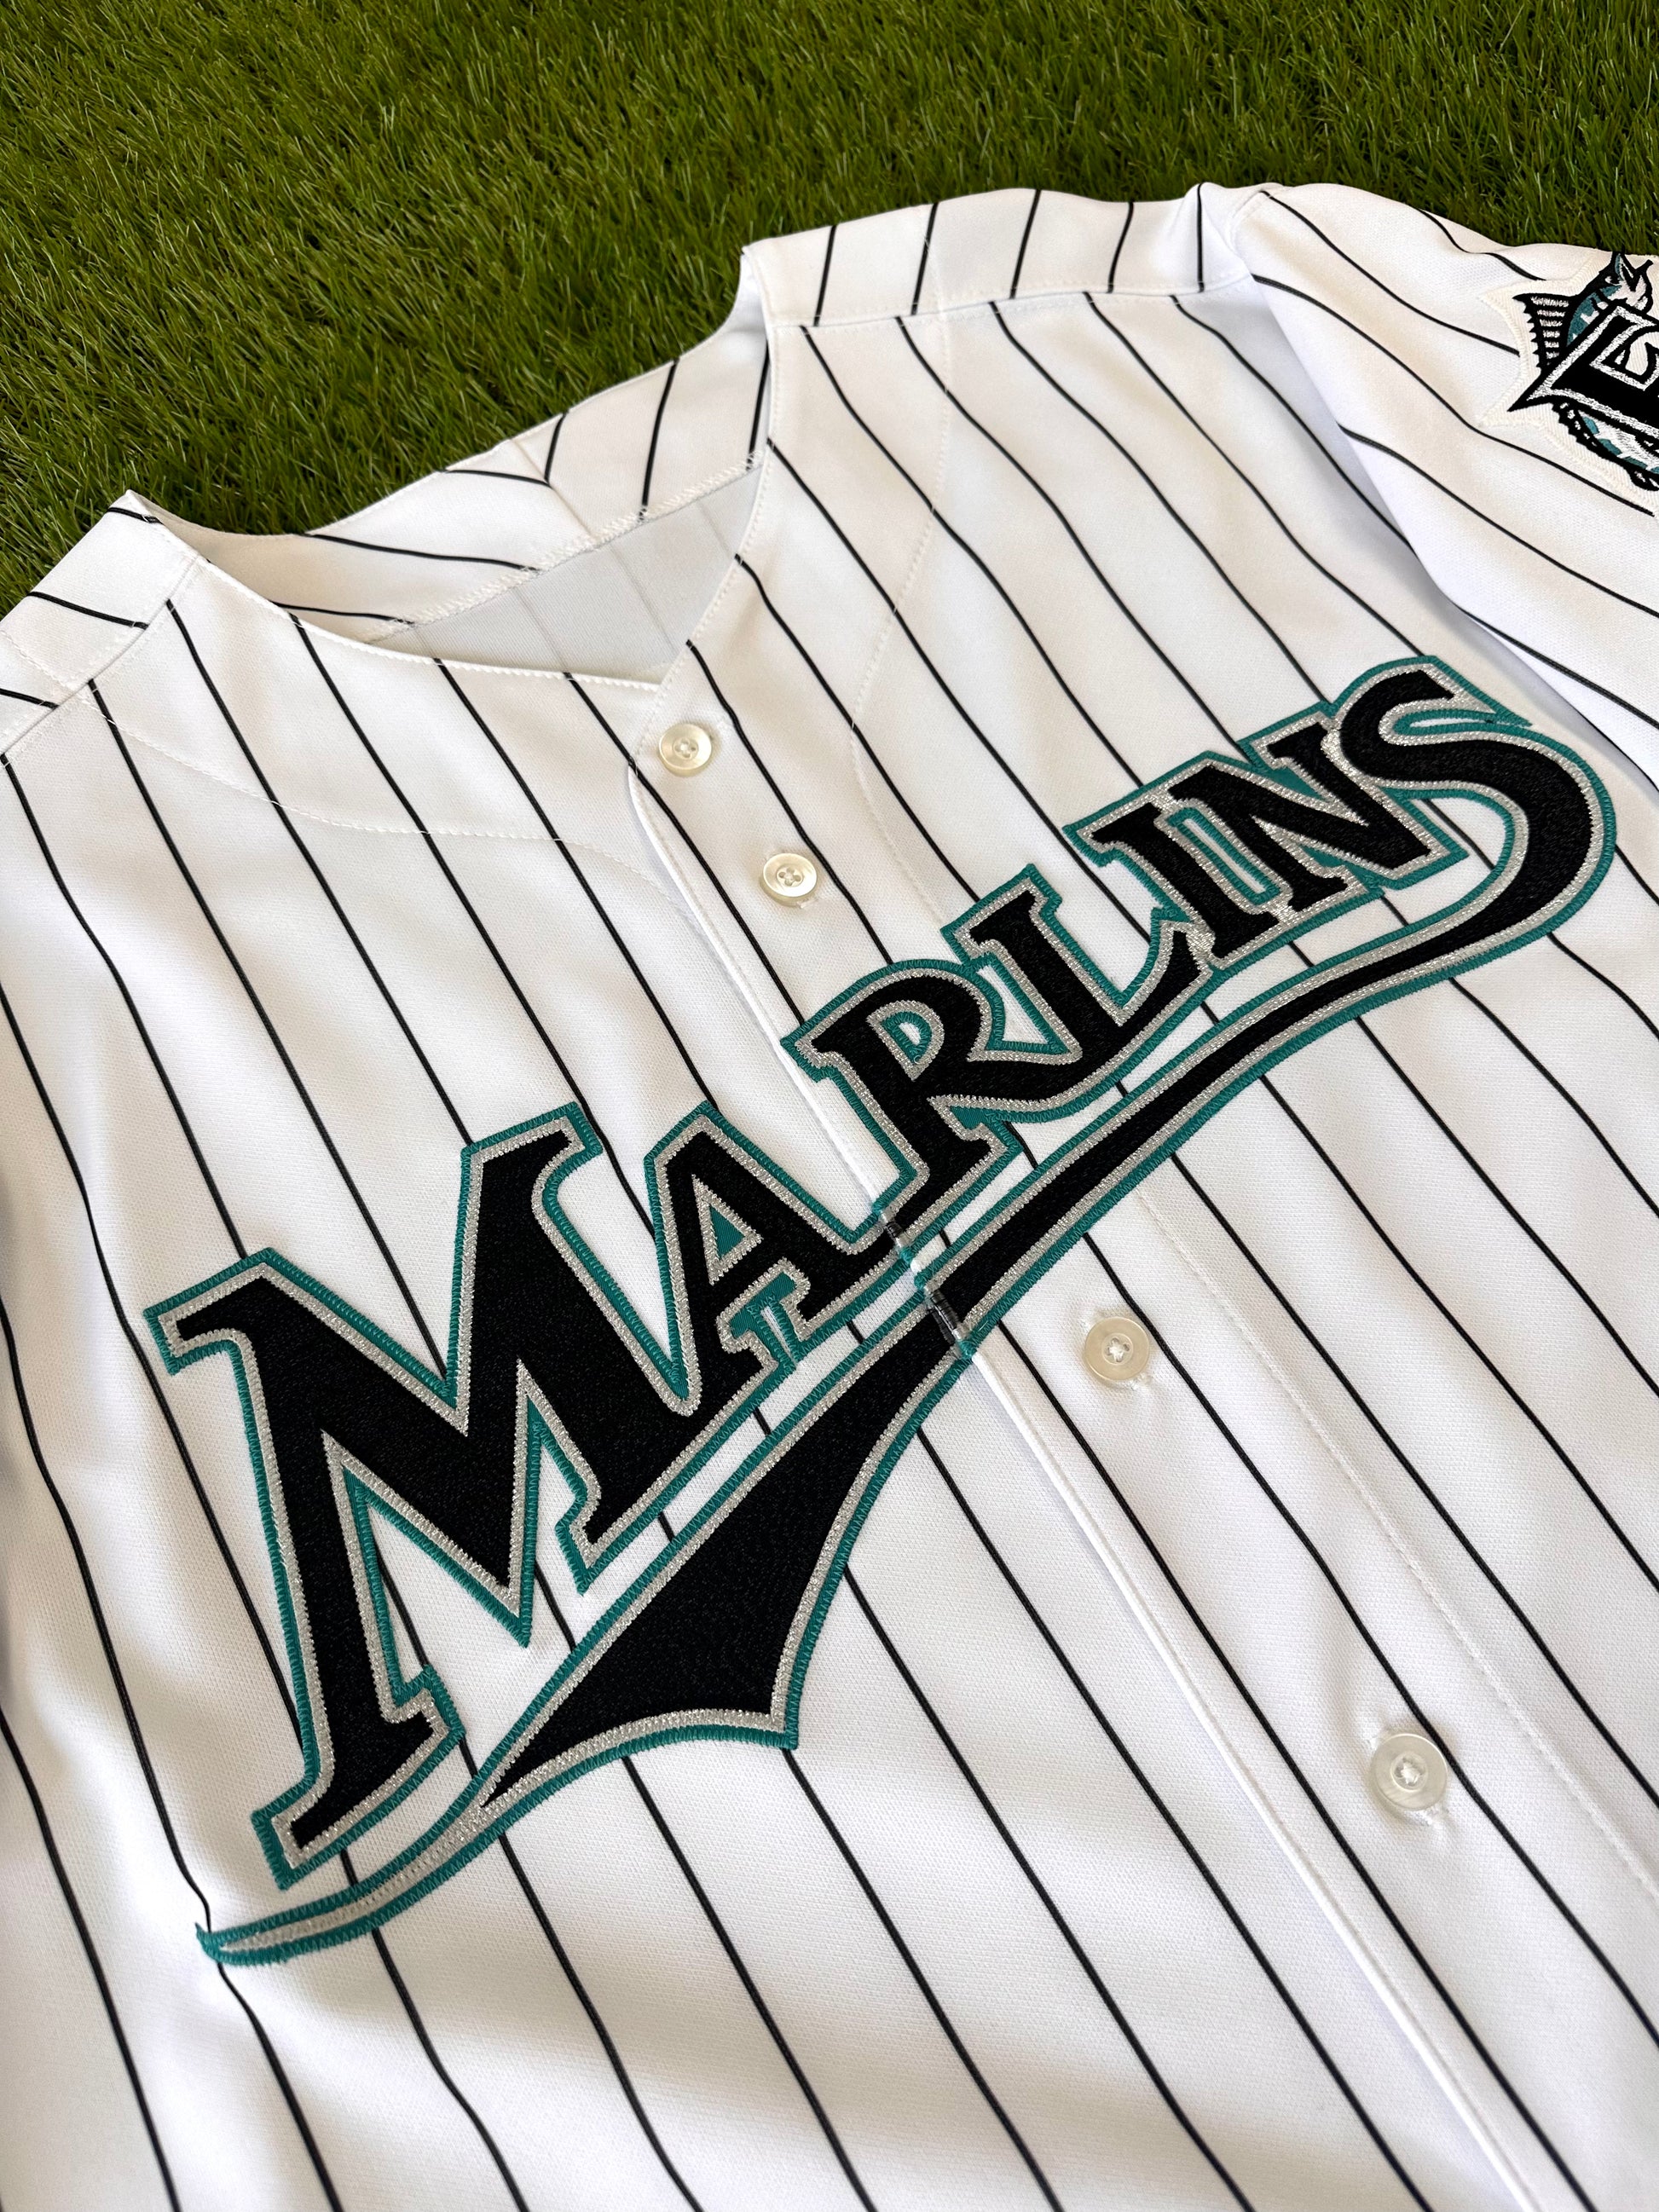 Mens MLB Miami Marlins Authentic On Field Flex Base Jersey - Road Gray